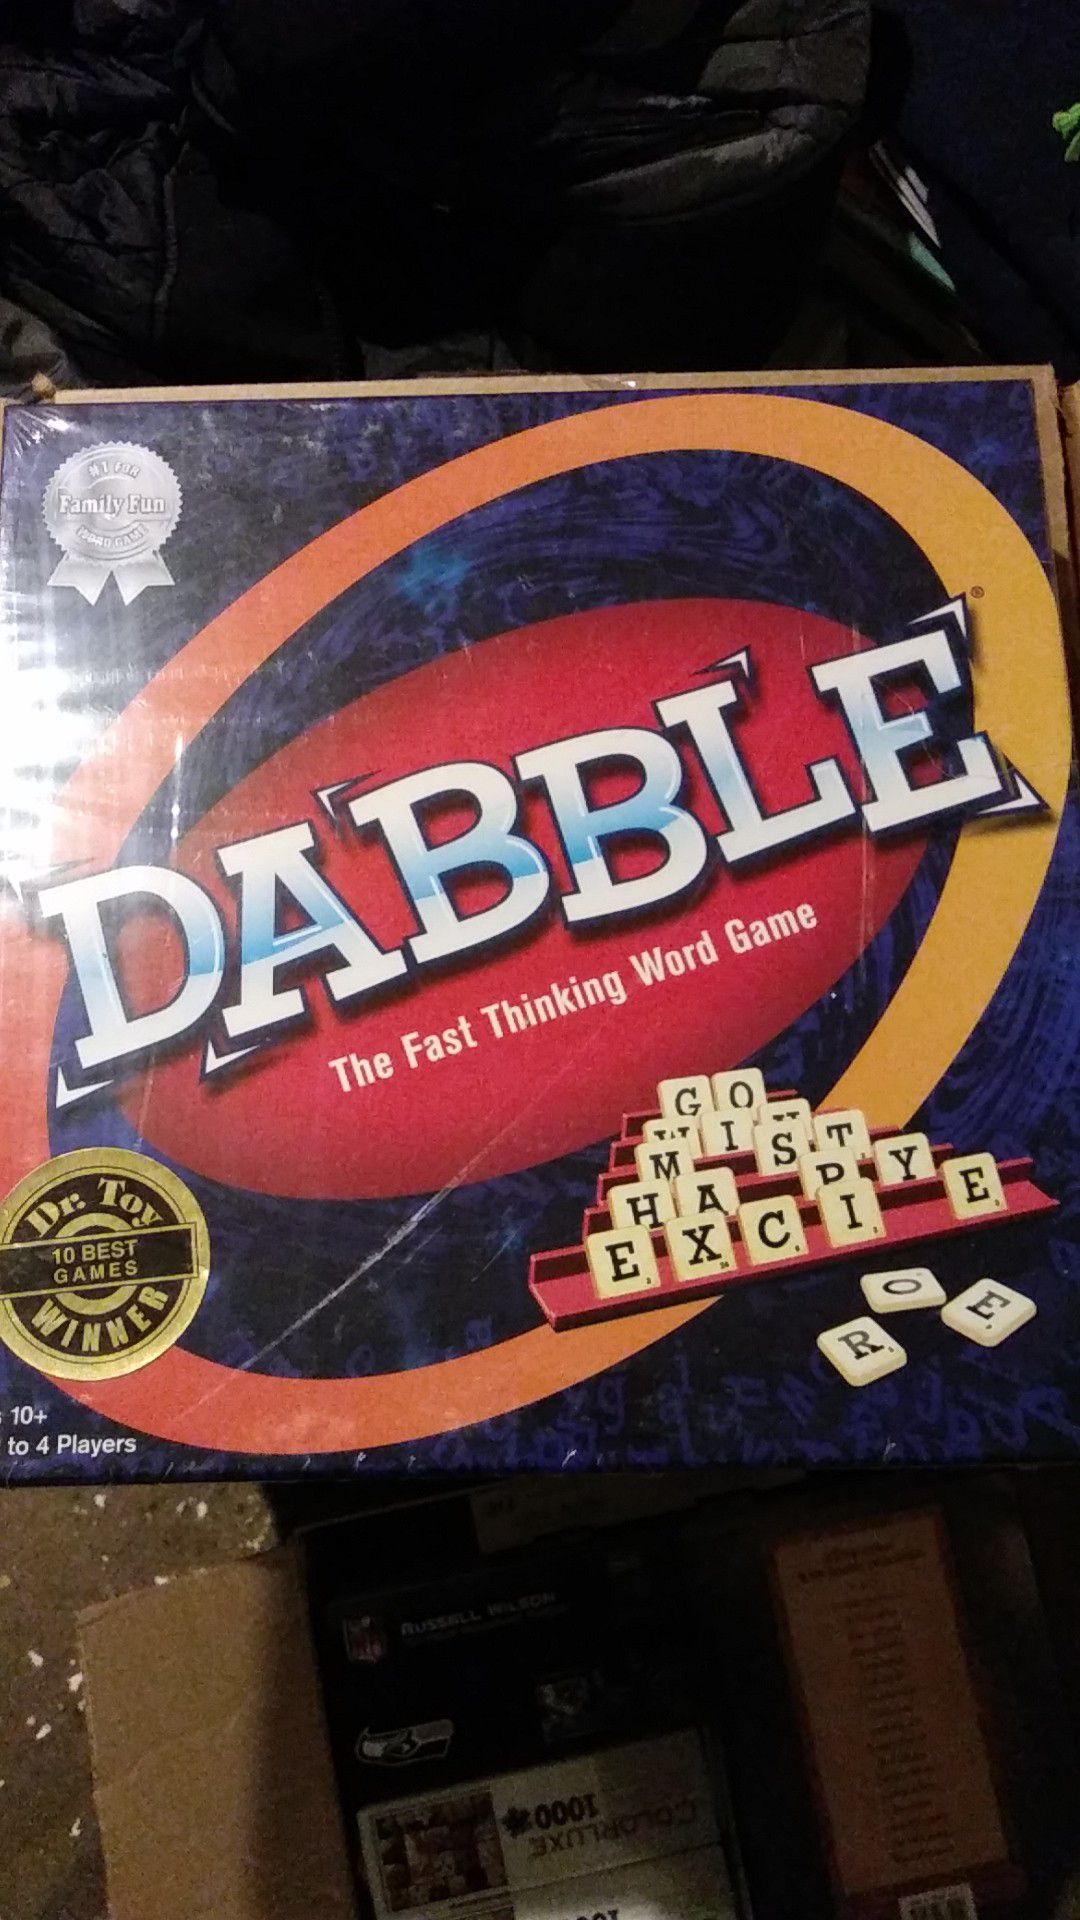 DABBLE The Fast Thinking Word Game BRAND NEW